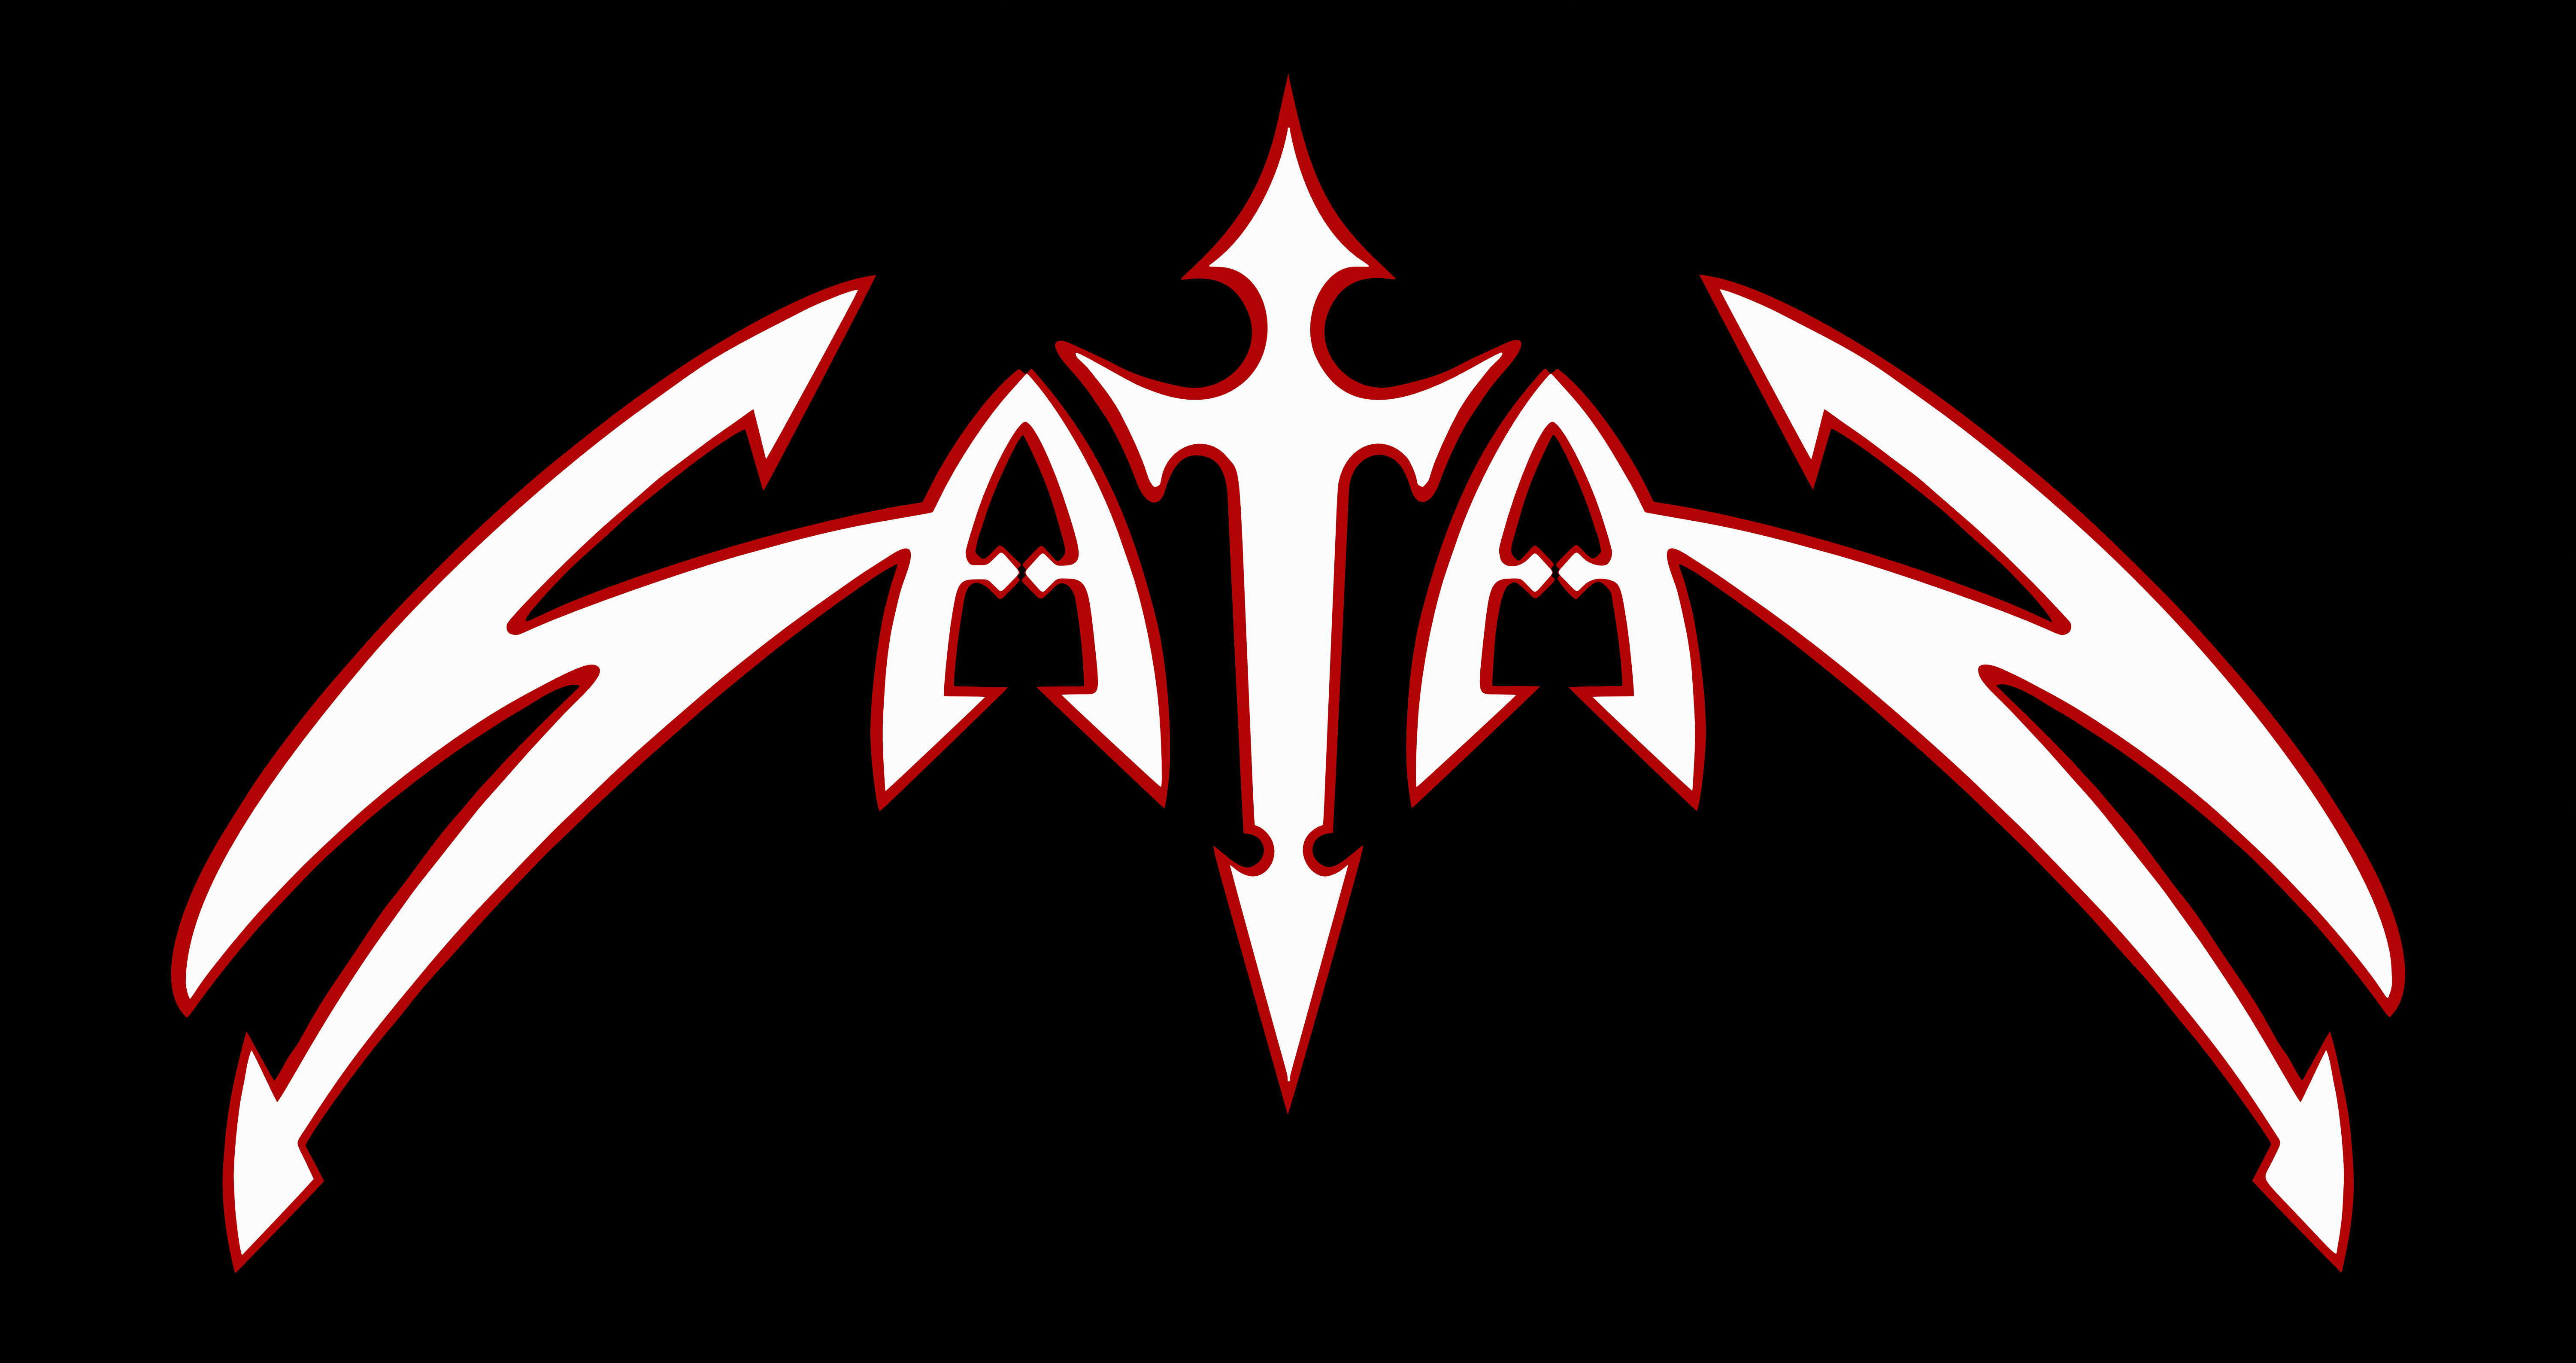 SATAN_Logo_White_with_Red_on_Black.png